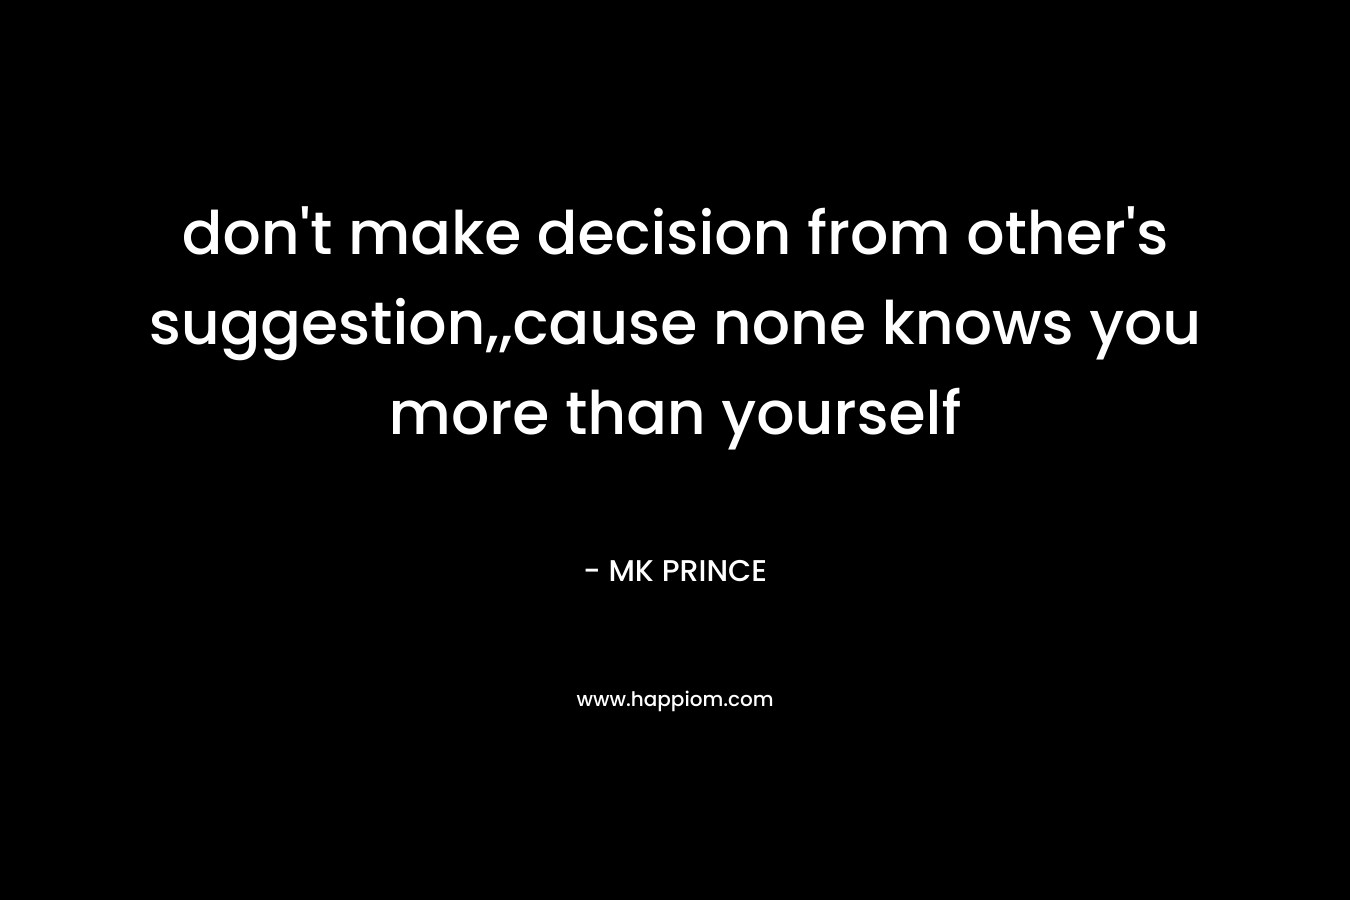 don’t make decision from other’s suggestion,,cause none knows you more than yourself – MK PRINCE